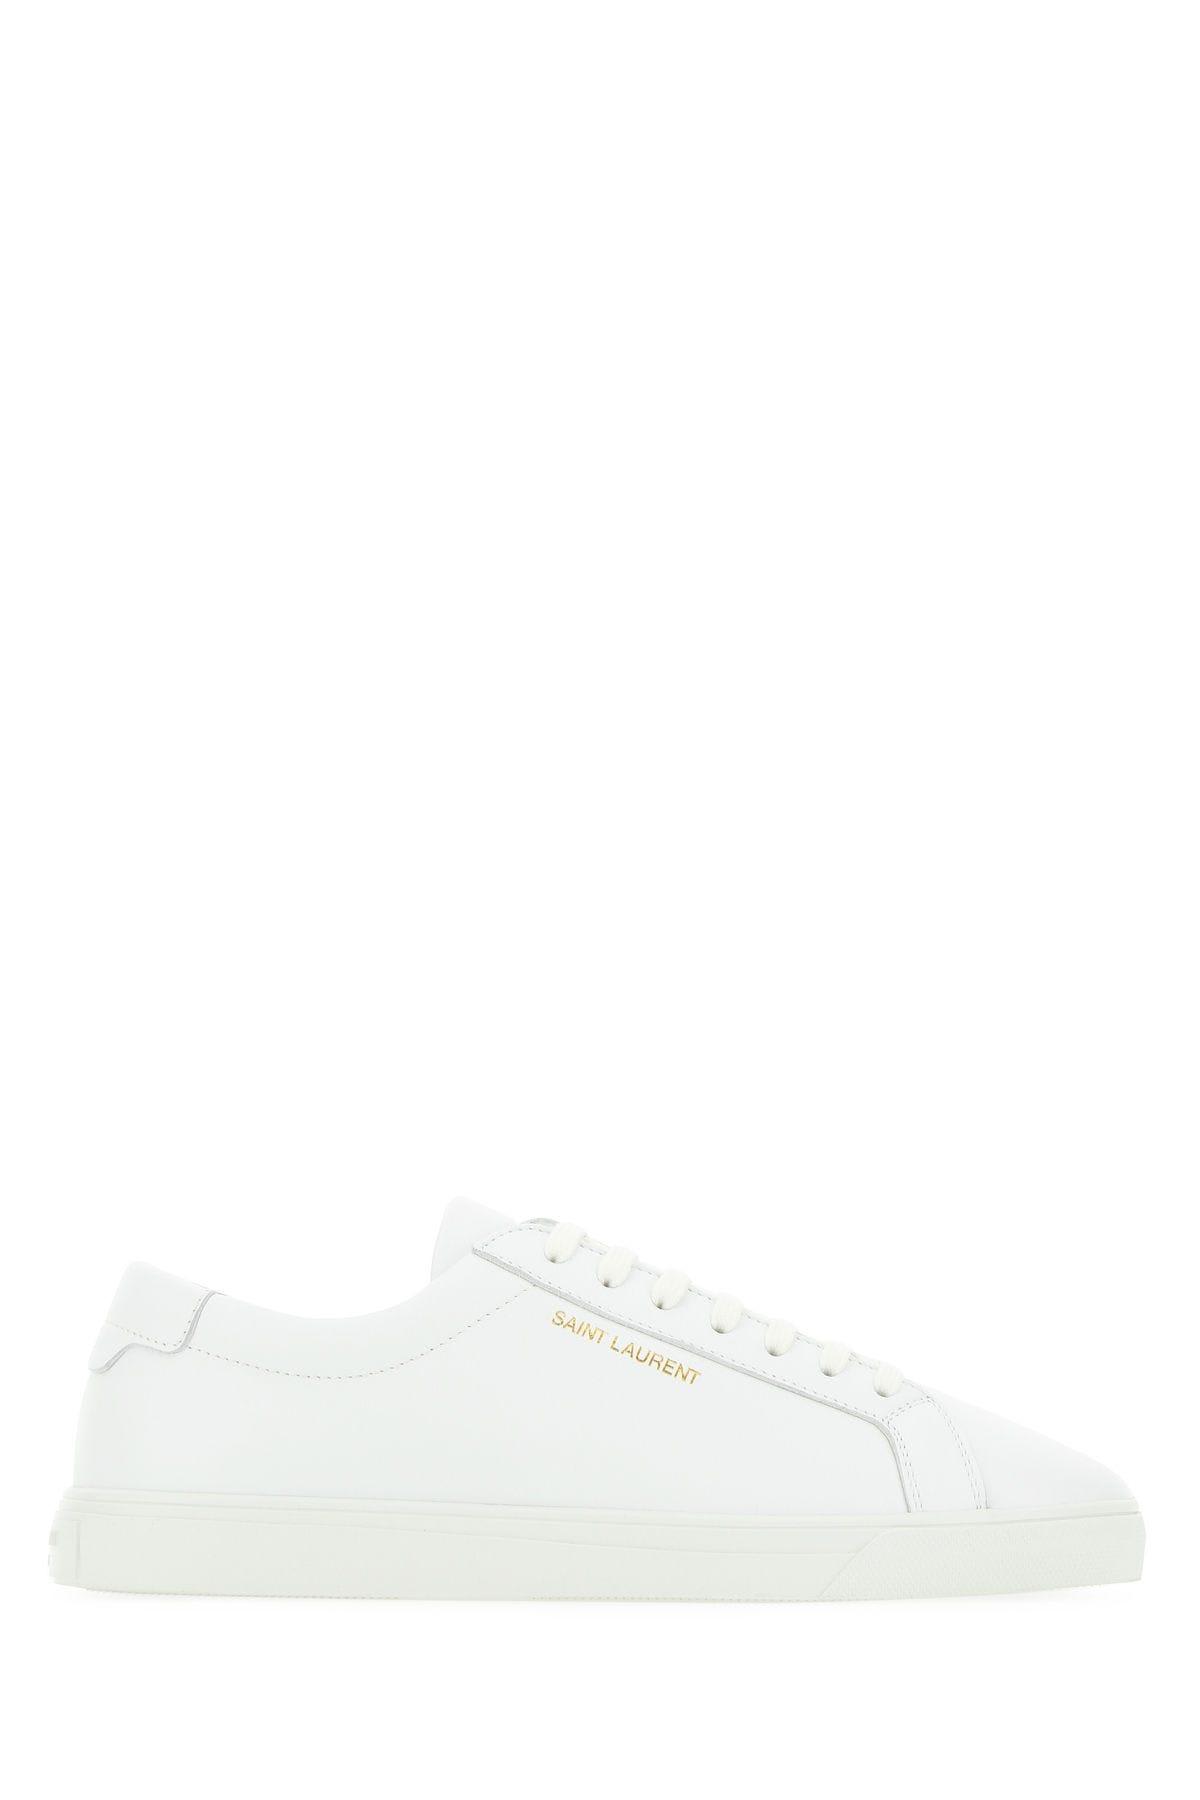 SAINT LAURENT WHITE LEATHER ANDY SNEAKERS